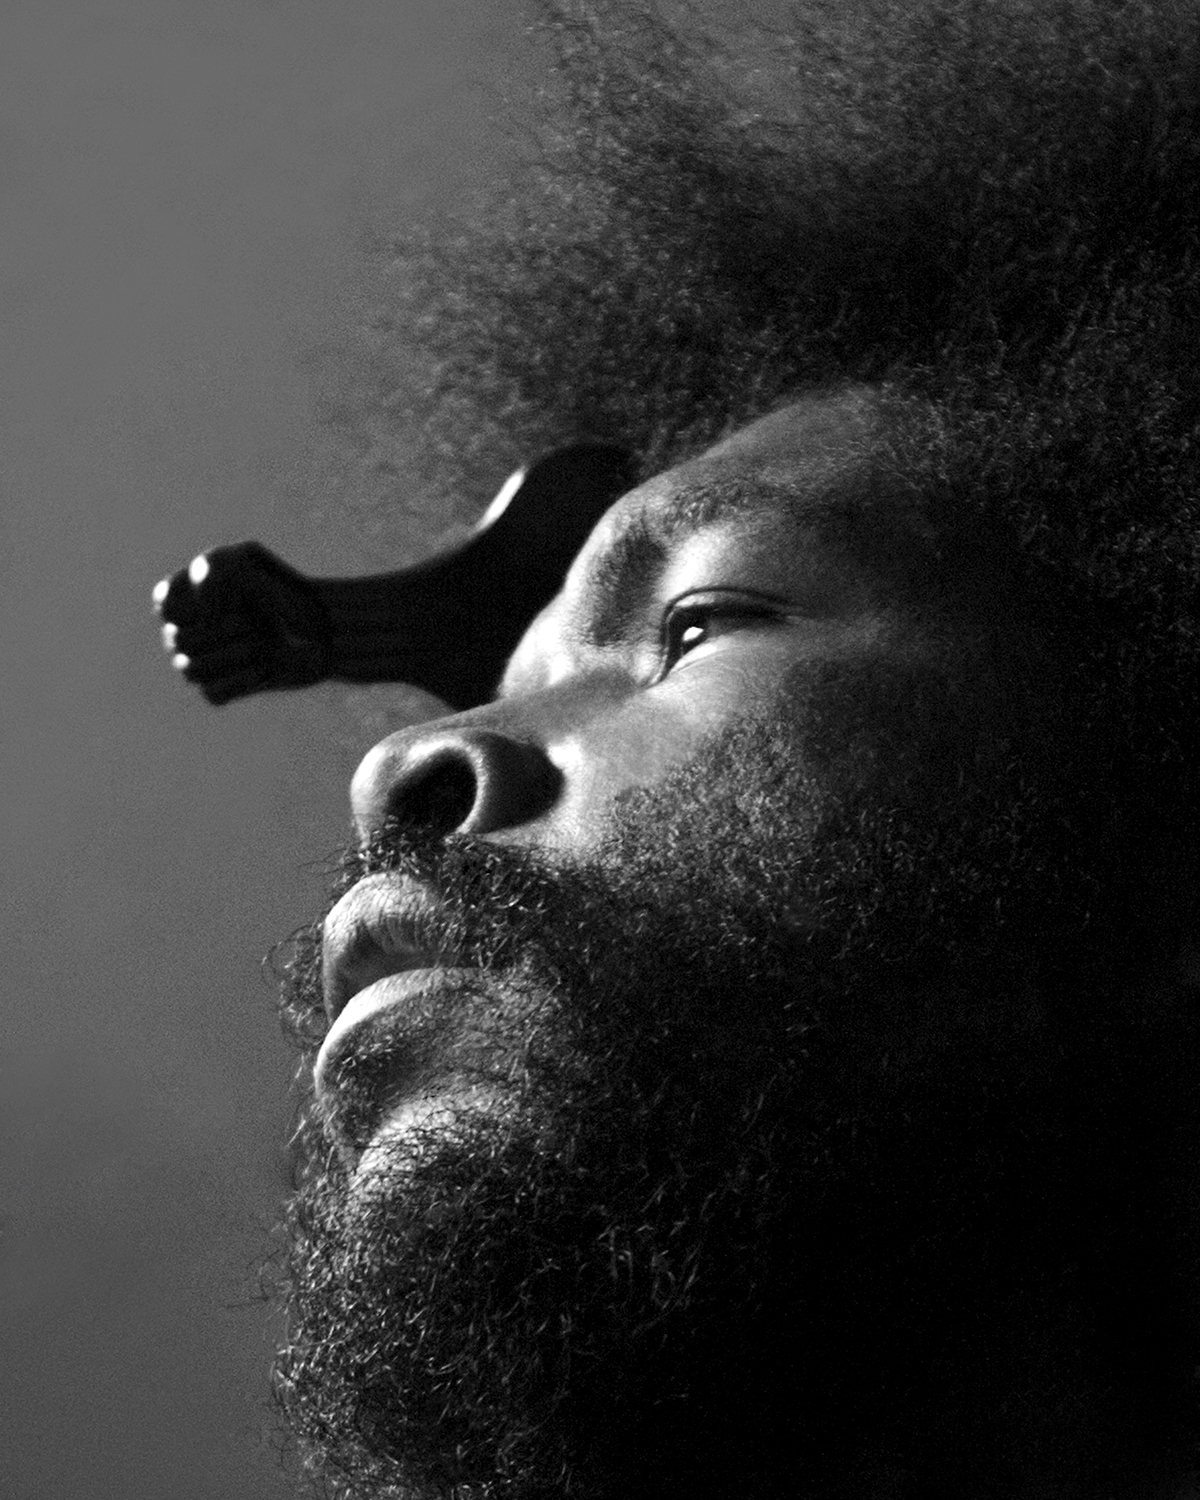 Questlove photographed by Aviva Klein - copyright 2021